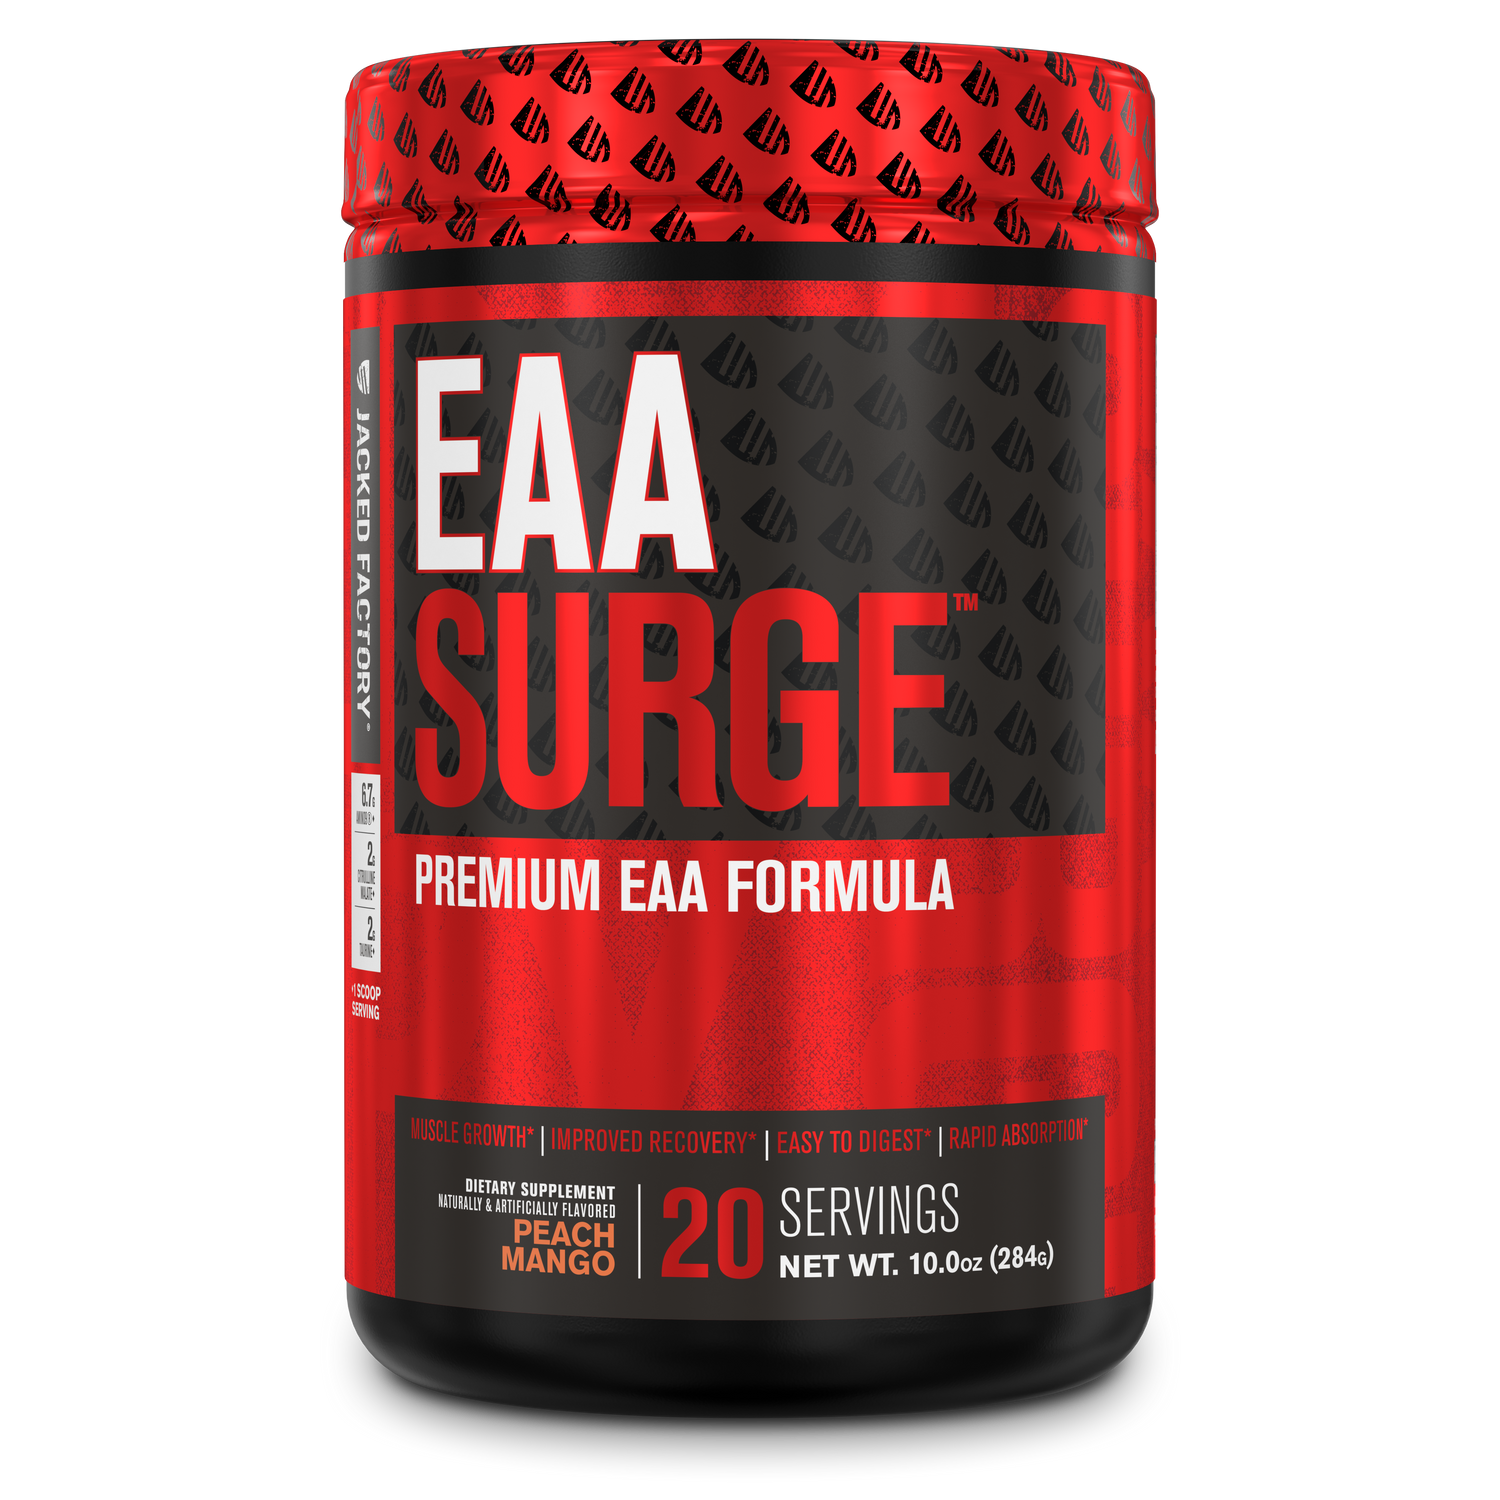 Jacked Factory's Peach Mango EAA Surge (20 servings) in a black bottle with red label